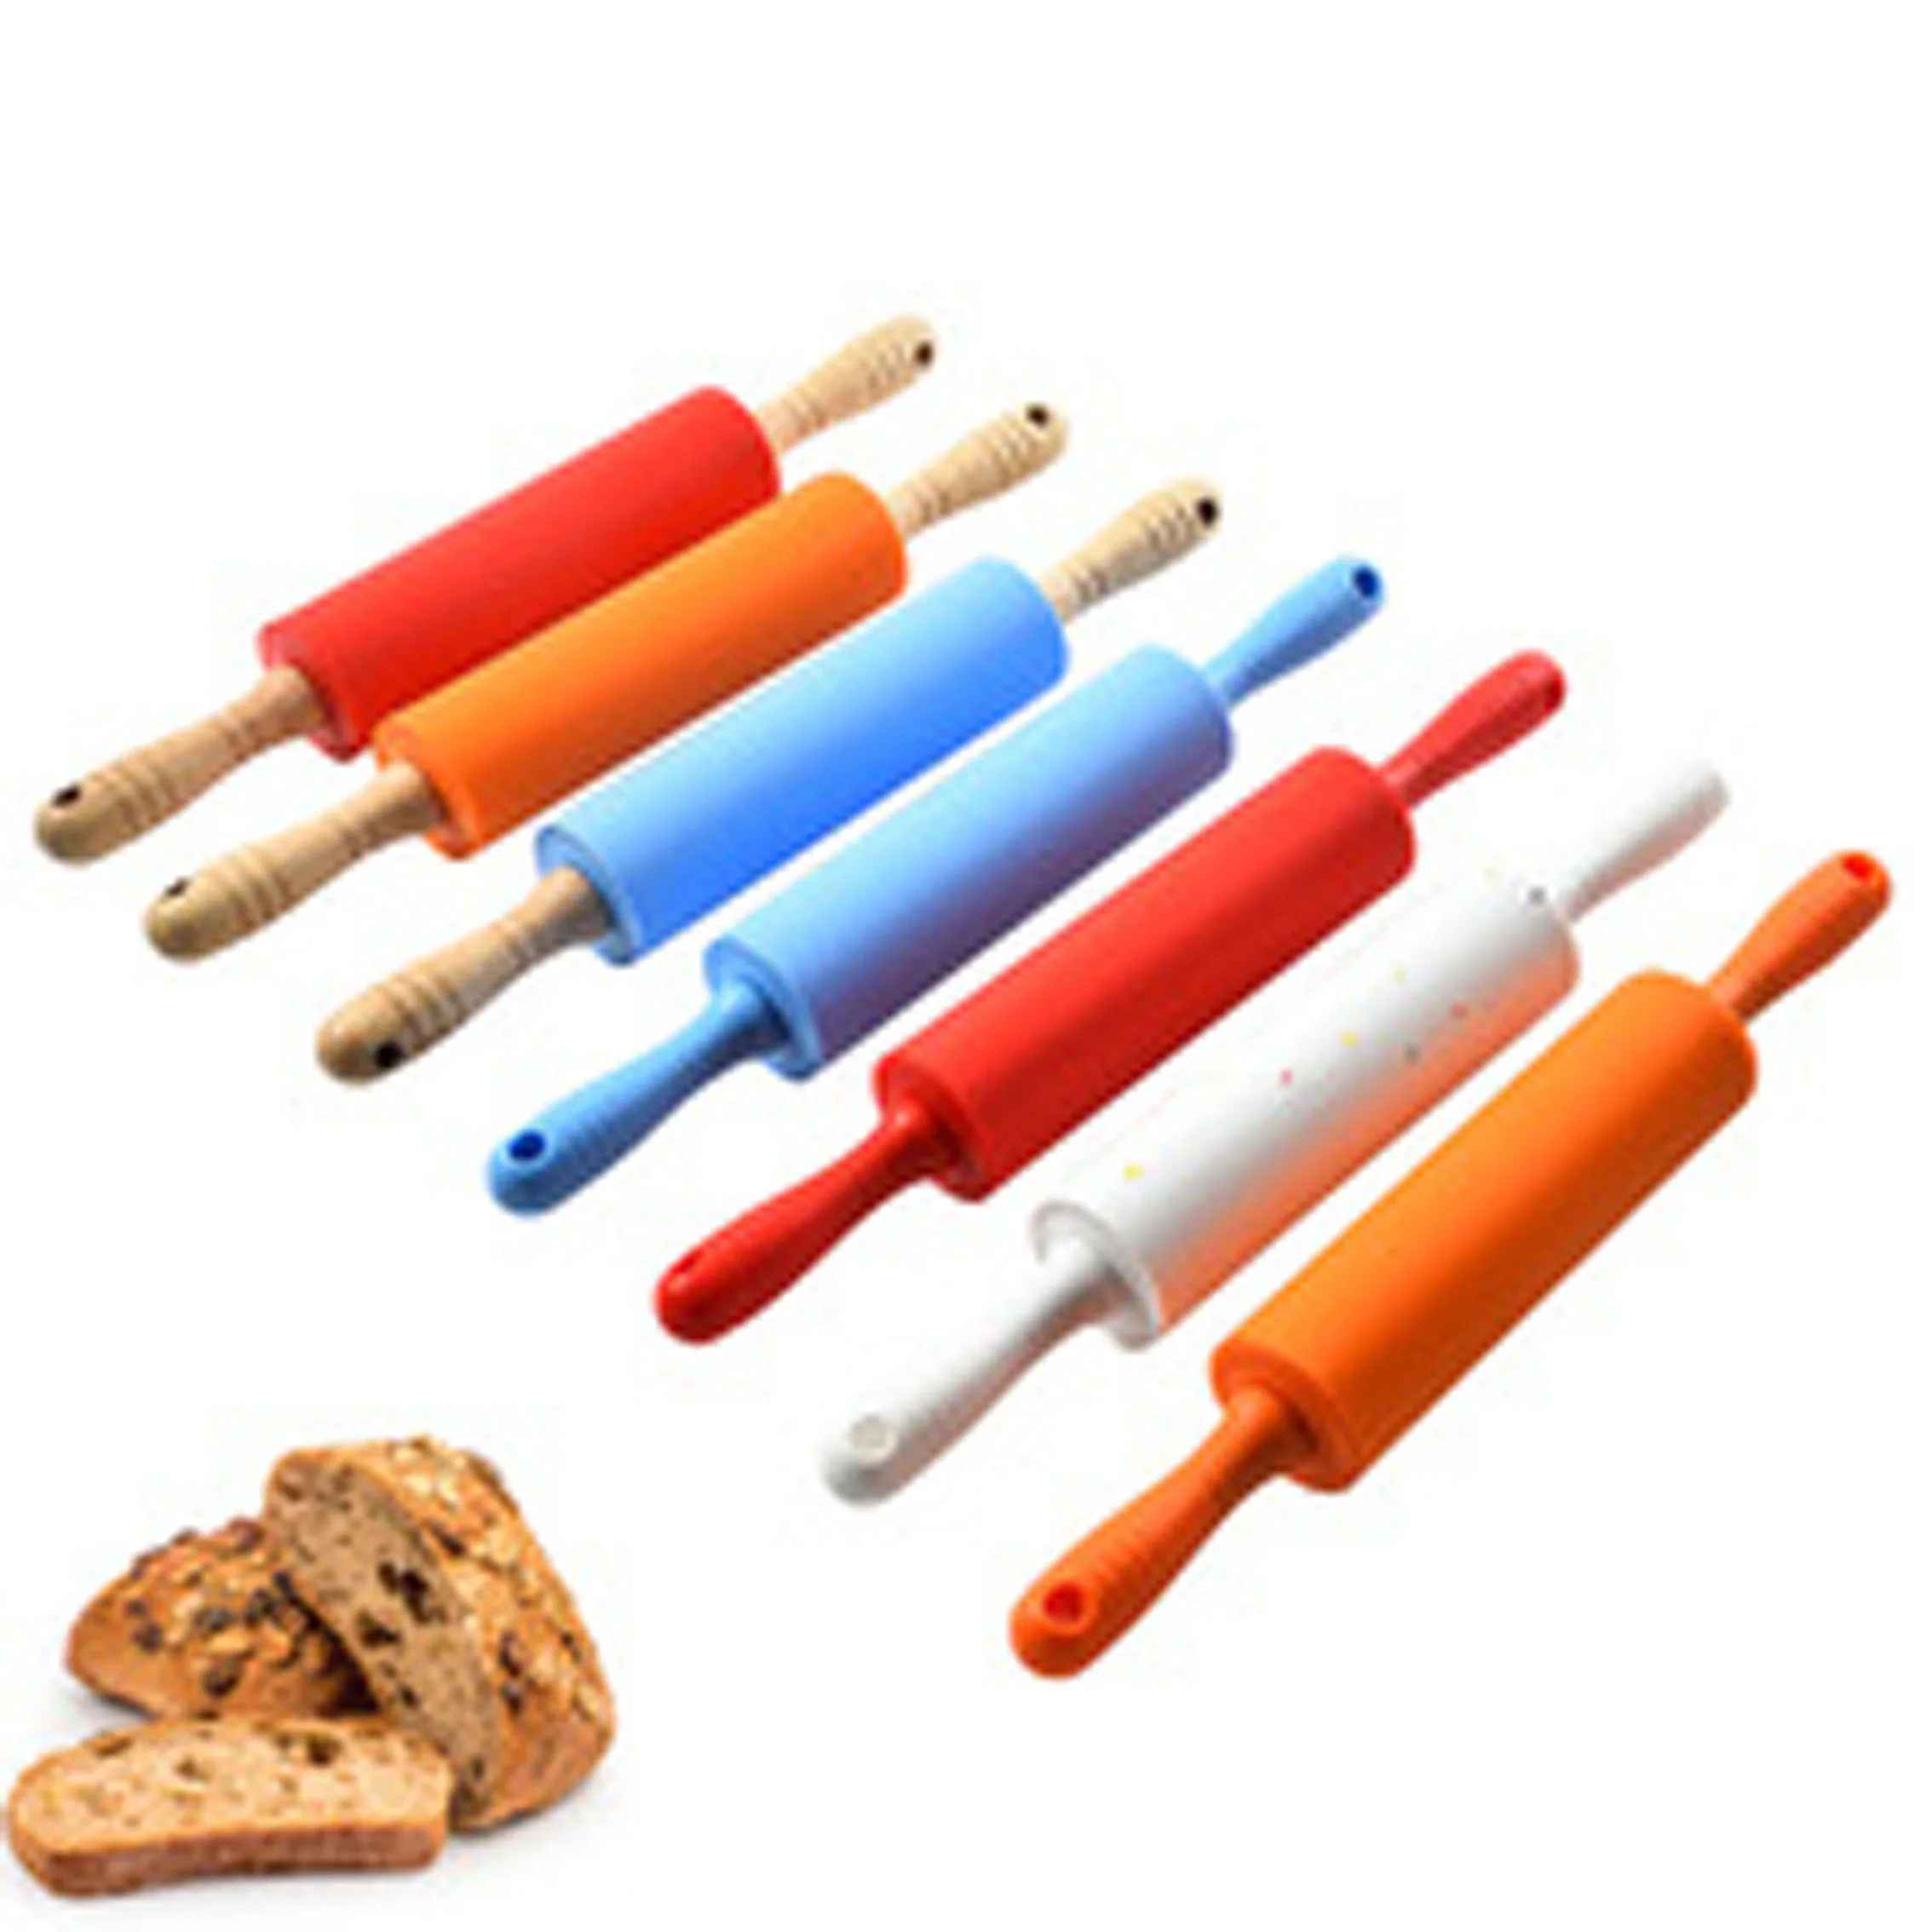 High Quality Non Stick Handle Cookie Series bakeware tools Rolling Pin Cake Stand